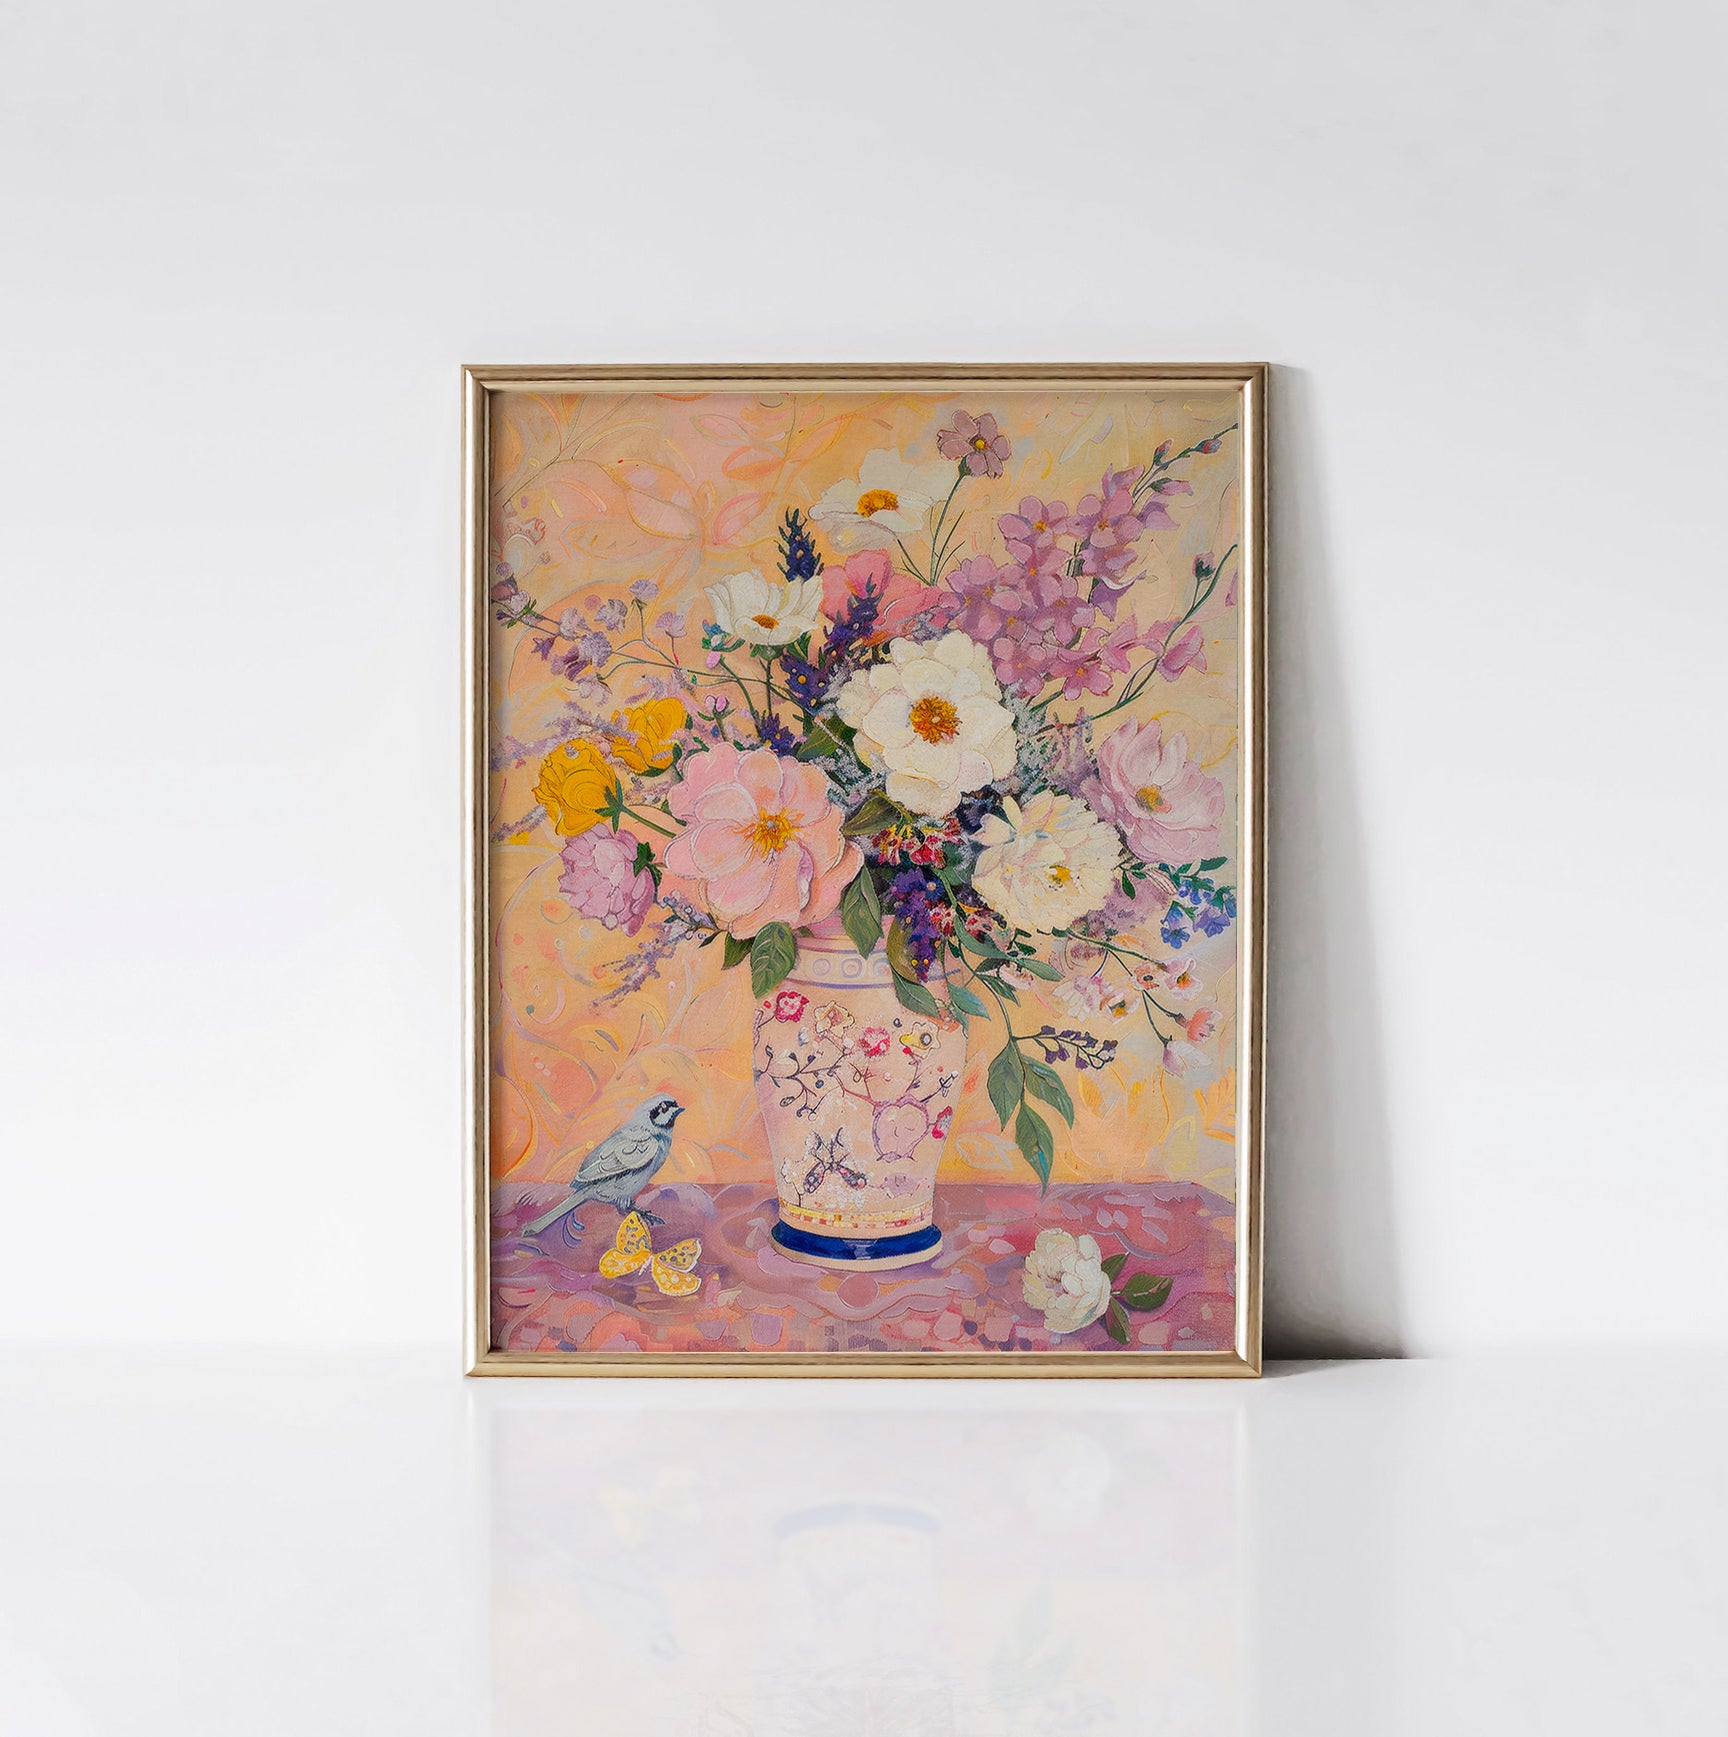 Blooming Melody Art Print framed in an elegant gold frame, featuring a vibrant floral arrangement with pink, yellow, and white flowers, complemented by a bird and butterflies.